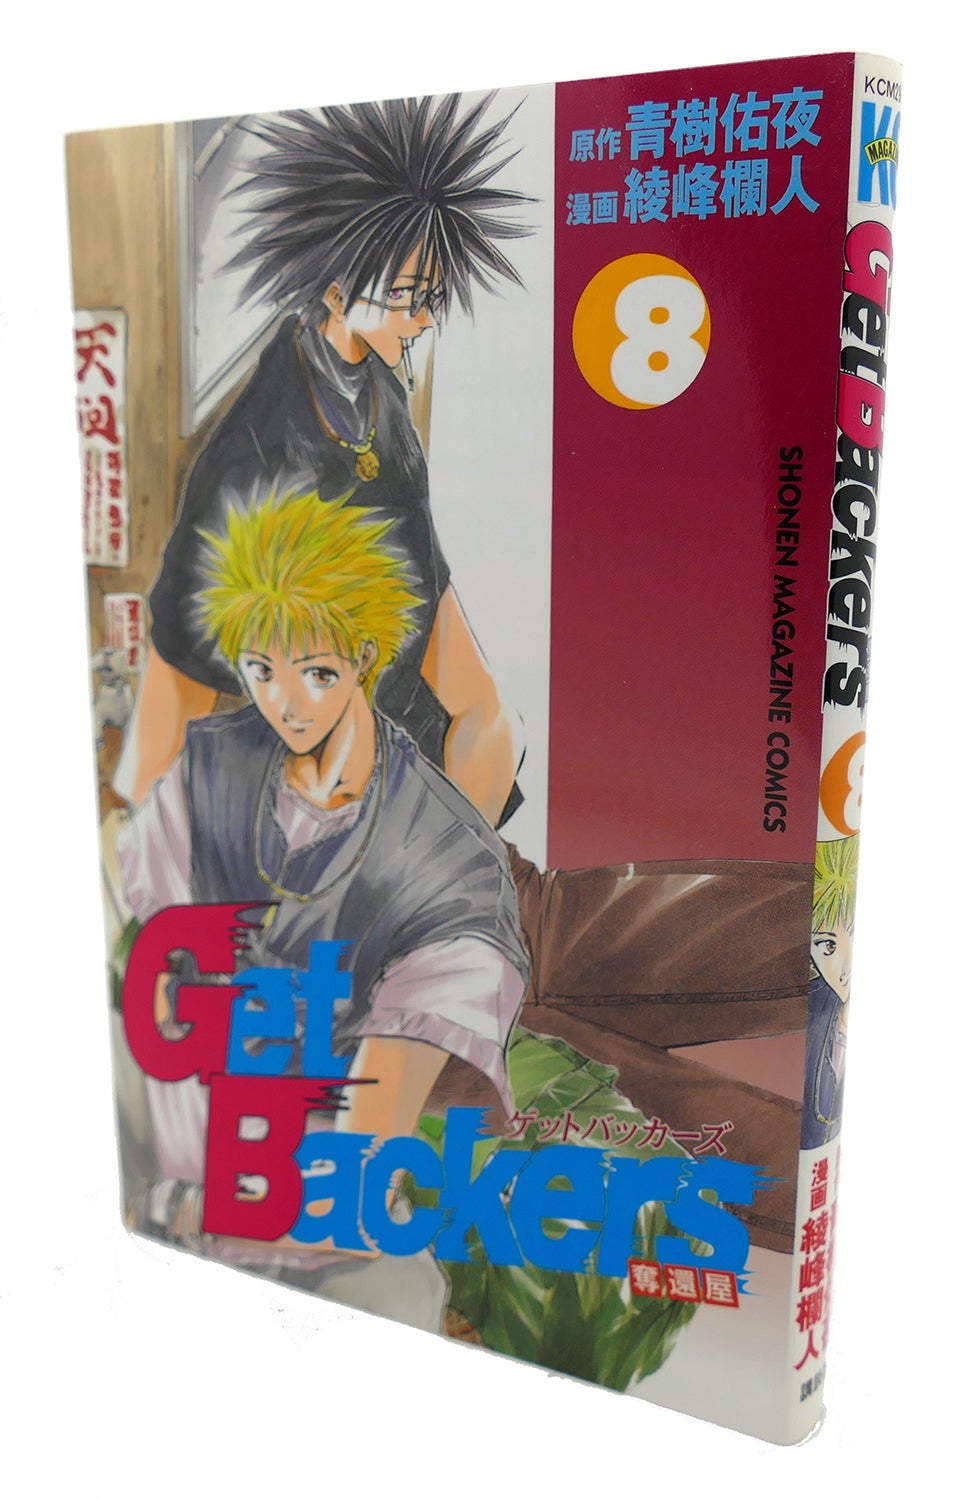 GET BACKERS VOL. 1 Text in Japanese. a Japanese Import. Manga / Anime by  Aoki on Rare Book Cellar